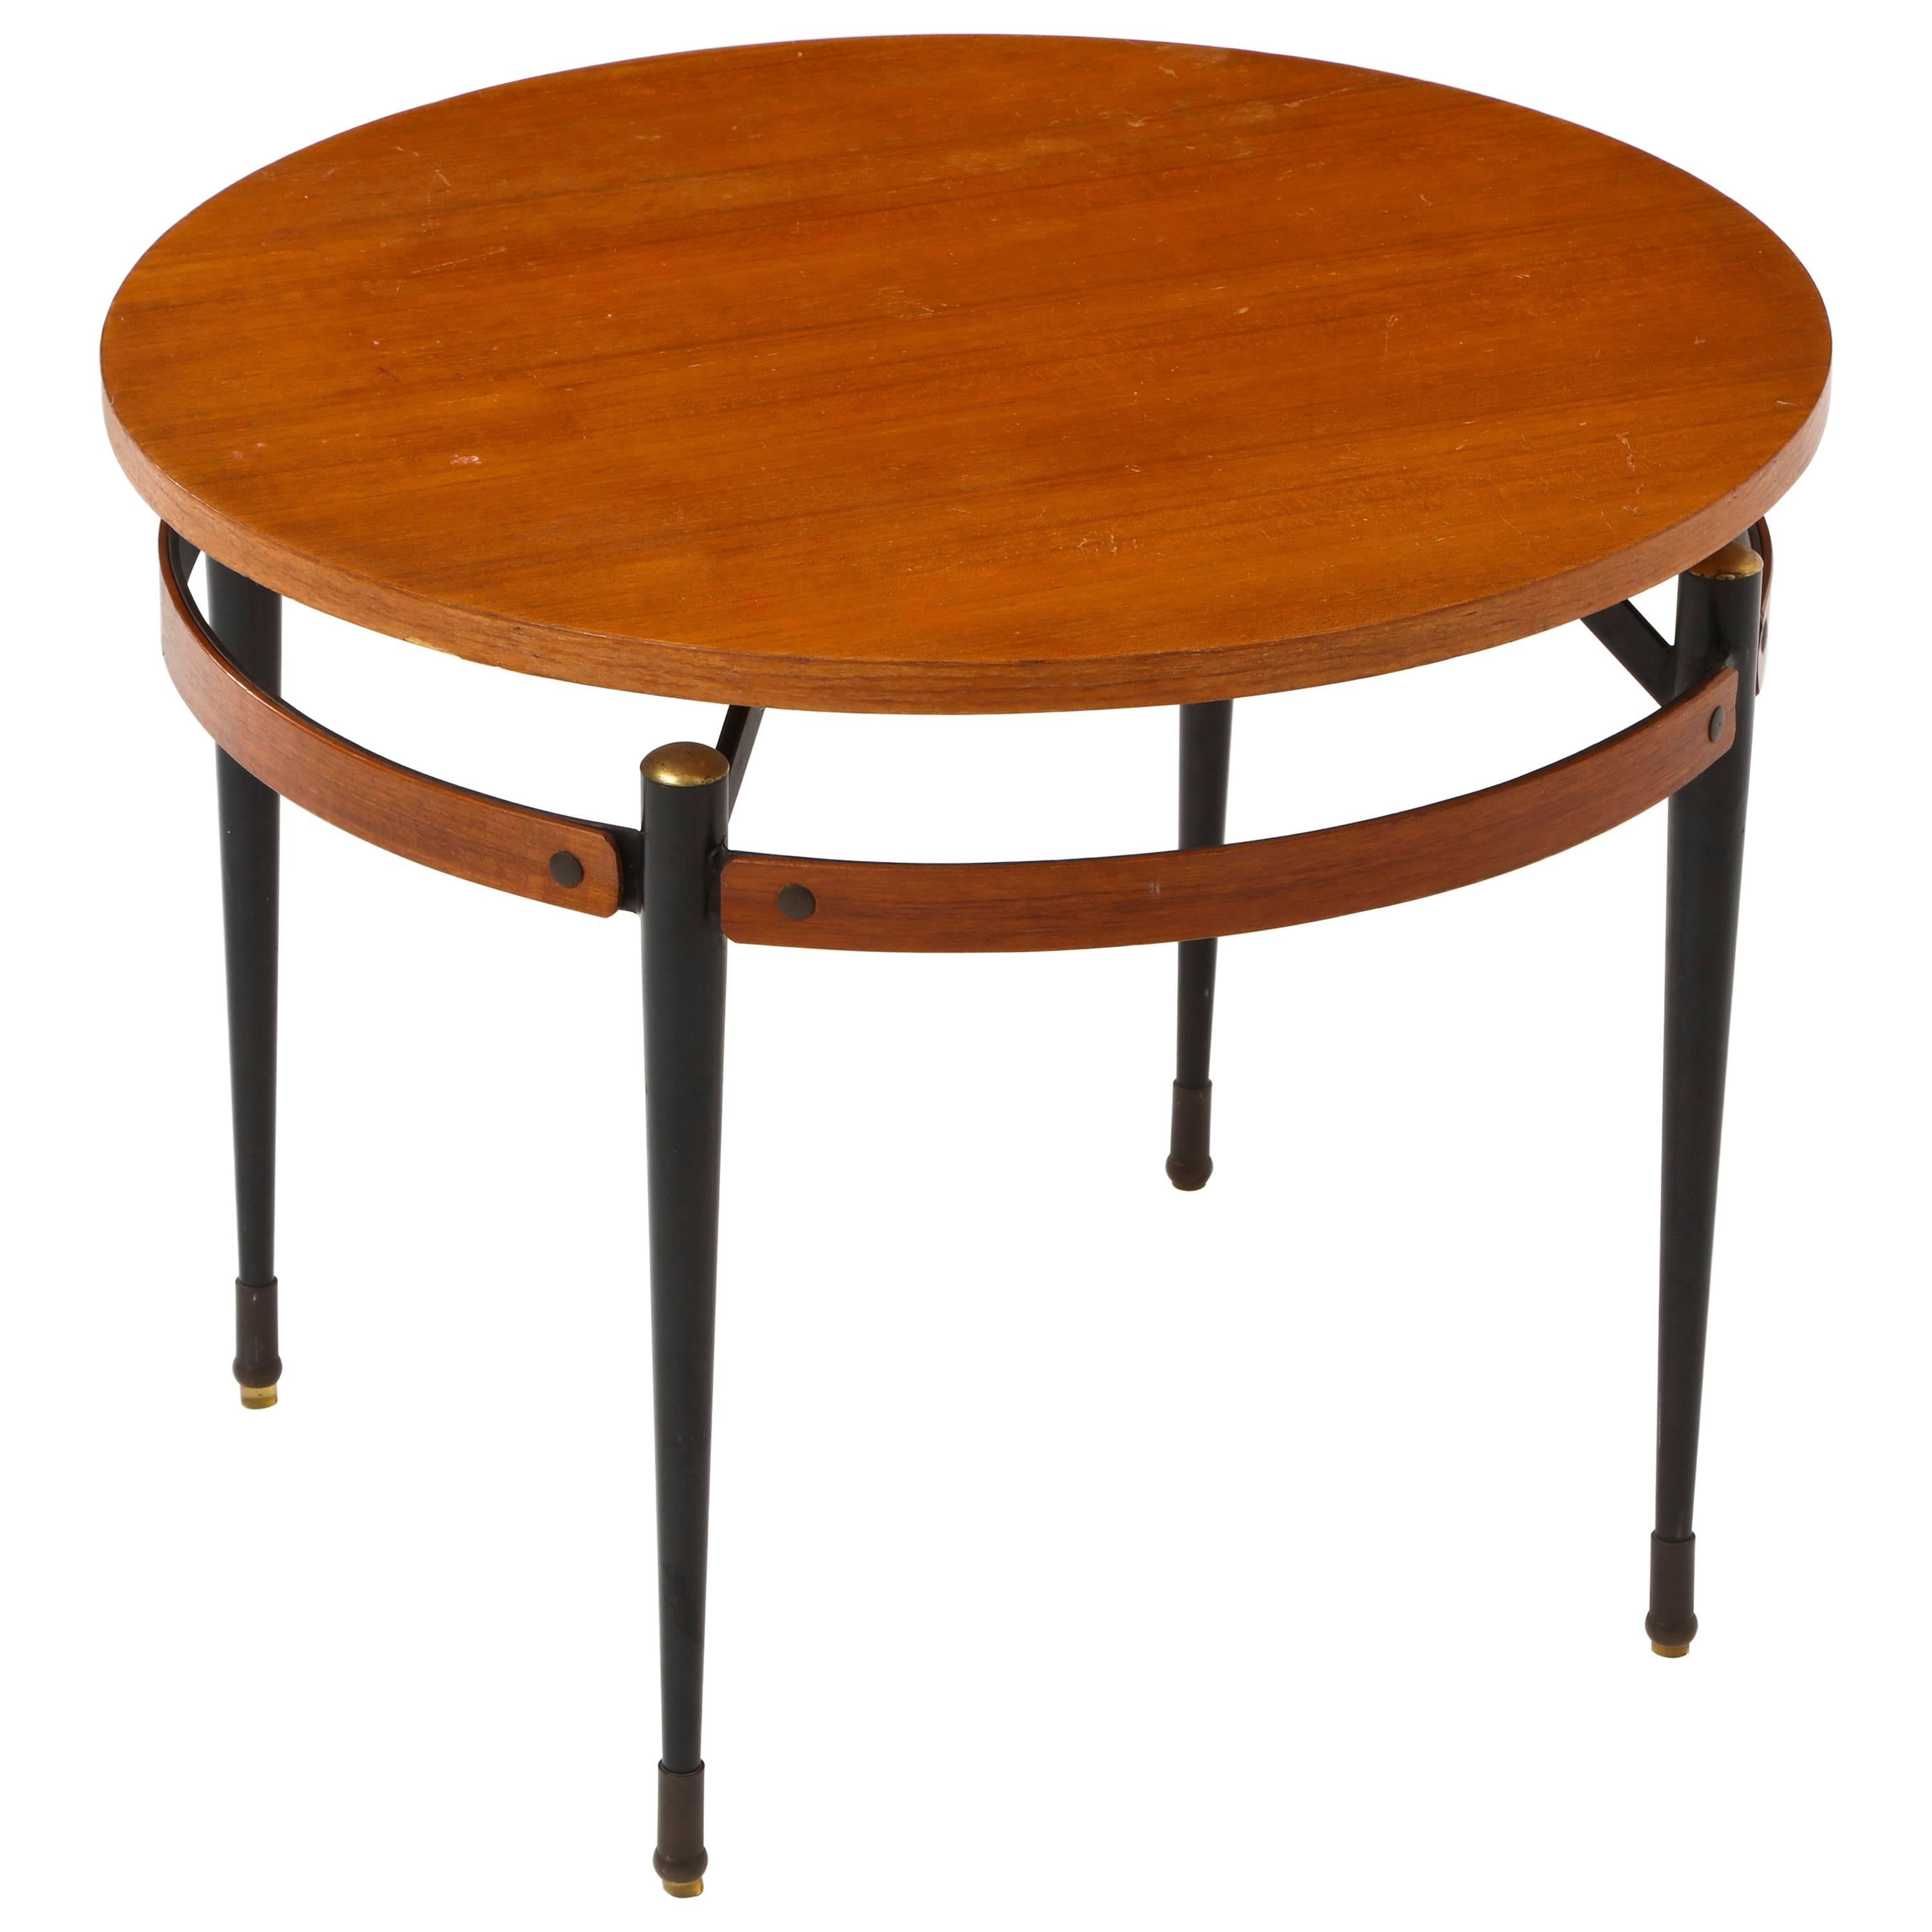 Italian Ponti Style Round Side Table with Metal Legs, Italy, 1950, Mid-Century